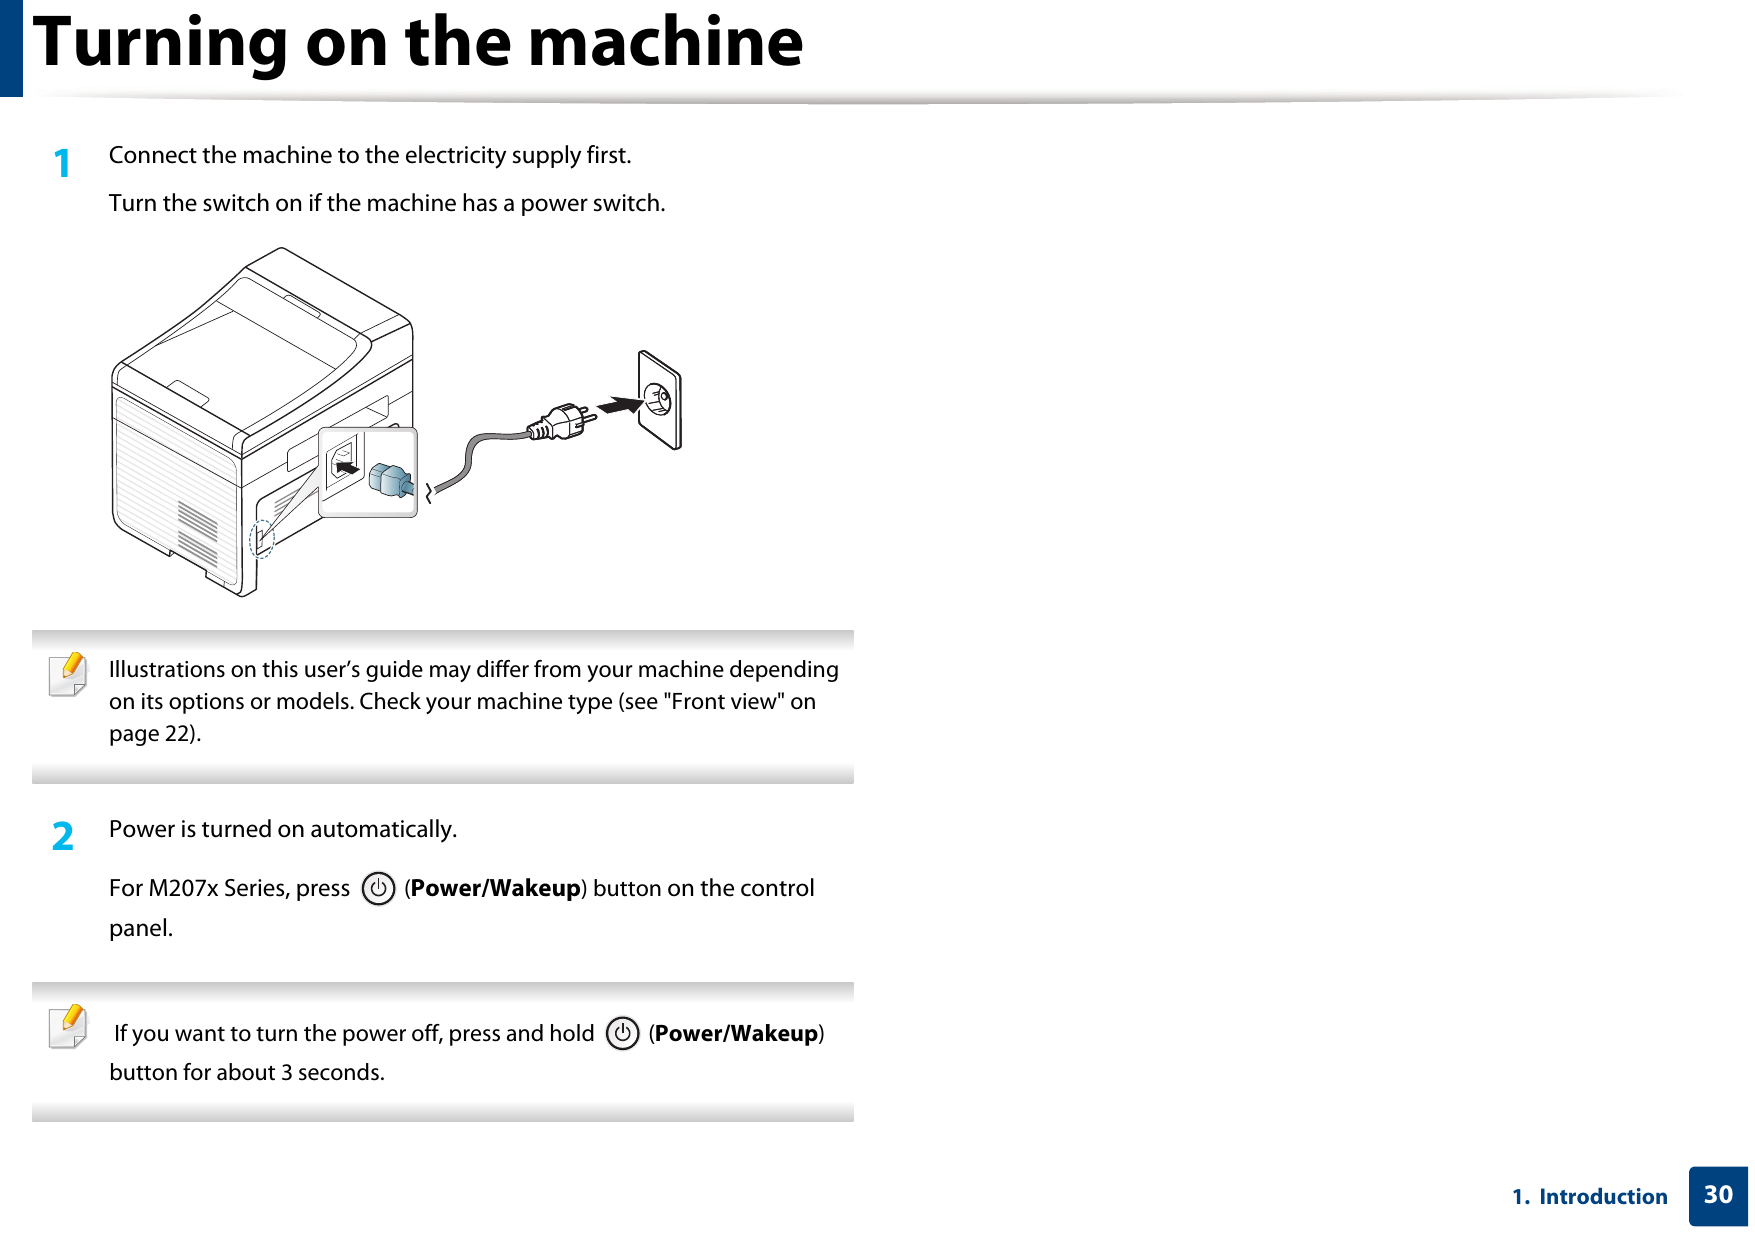 301.  IntroductionTurning on the machine1Connect the machine to the electricity supply first.Turn the switch on if the machine has a power switch. Illustrations on this user’s guide may differ from your machine depending on its options or models. Check your machine type (see &quot;Front view&quot; on page 22). 2  Power is turned on automatically.For M207x Series, press   (Power/Wakeup) button on the control panel.  If you want to turn the power off, press and hold   (Power/Wakeup) button for about 3 seconds. 